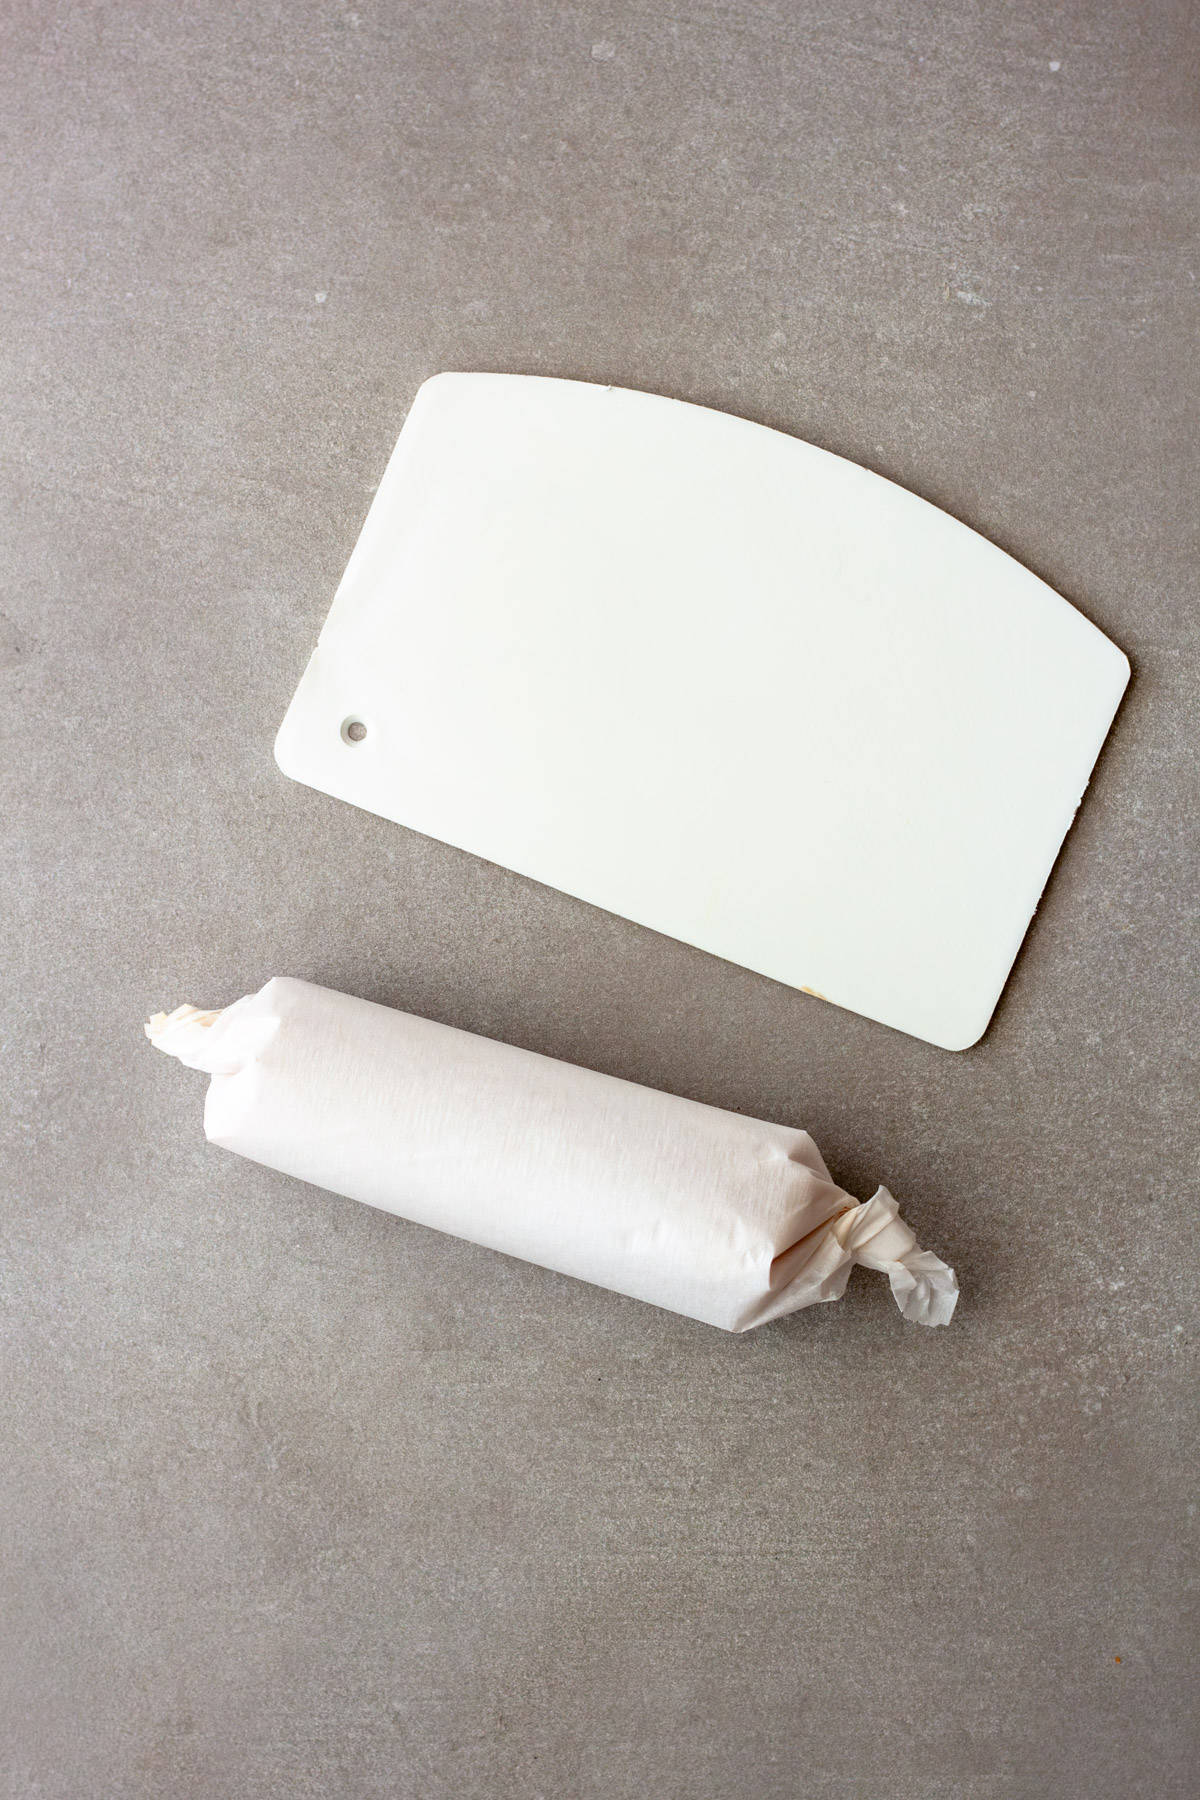 A roll of miso butter in parchment paper and a white bench scraper on a gray table.